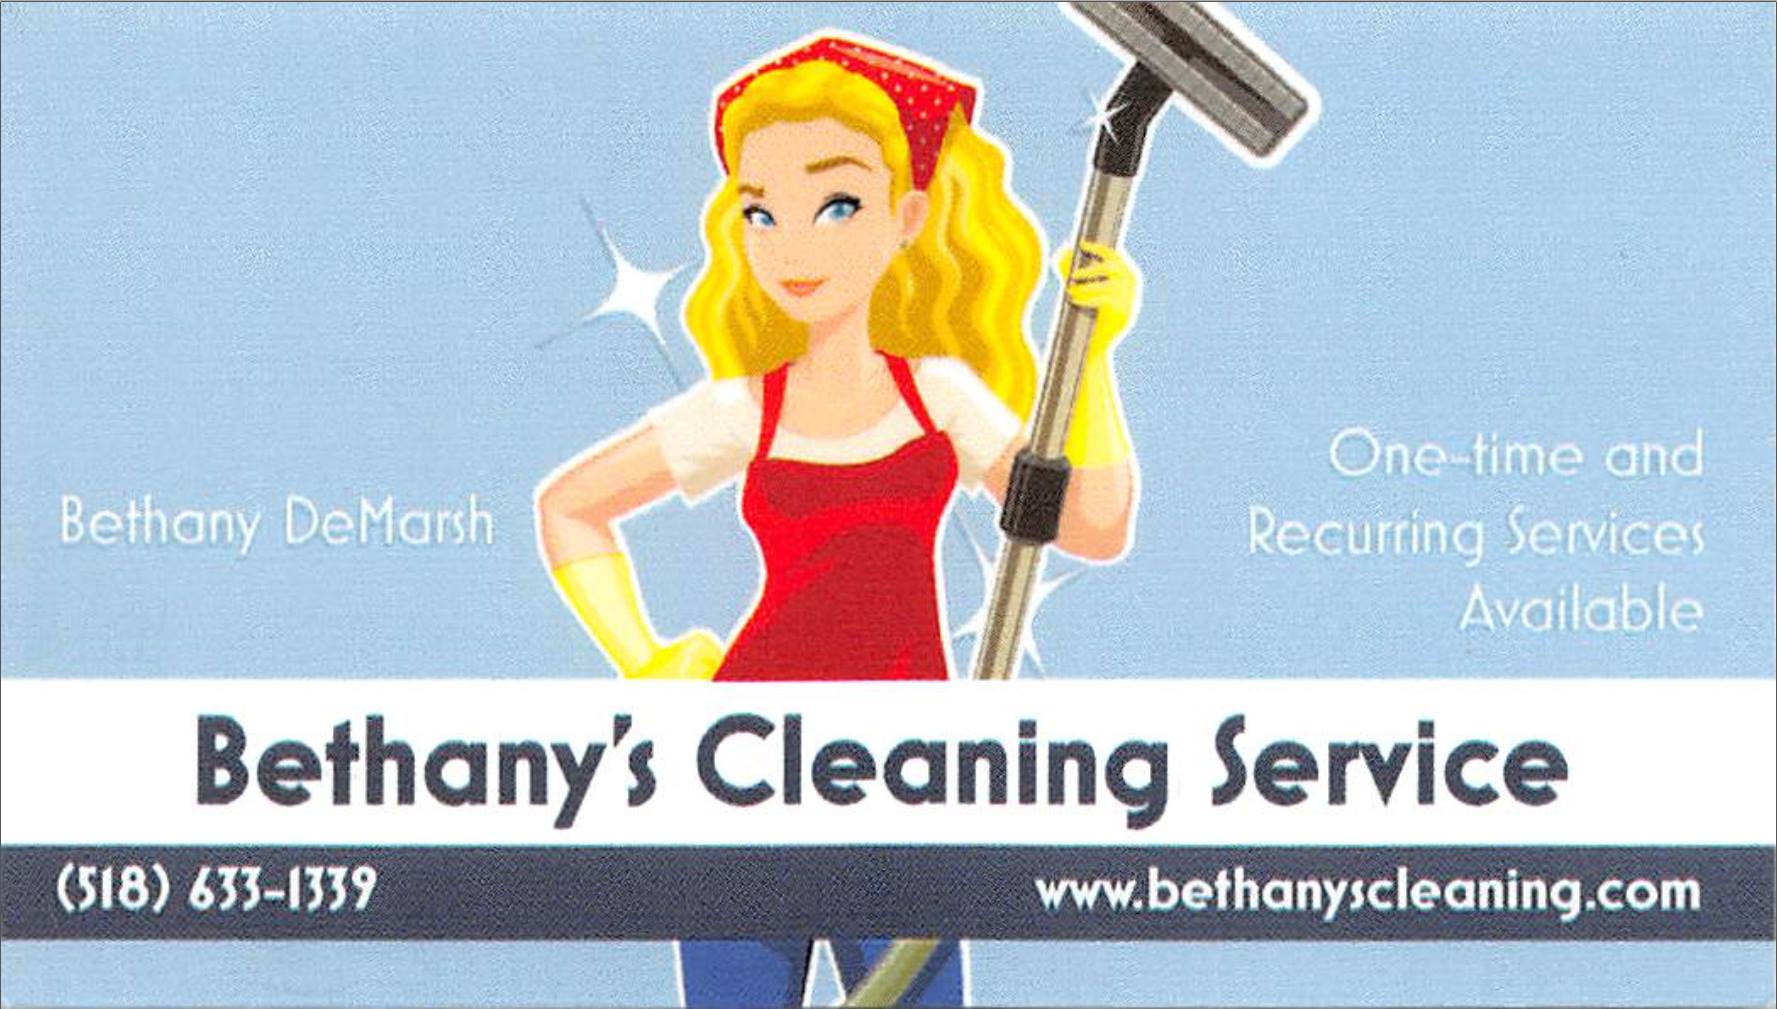 Bethany's Cleaning Service